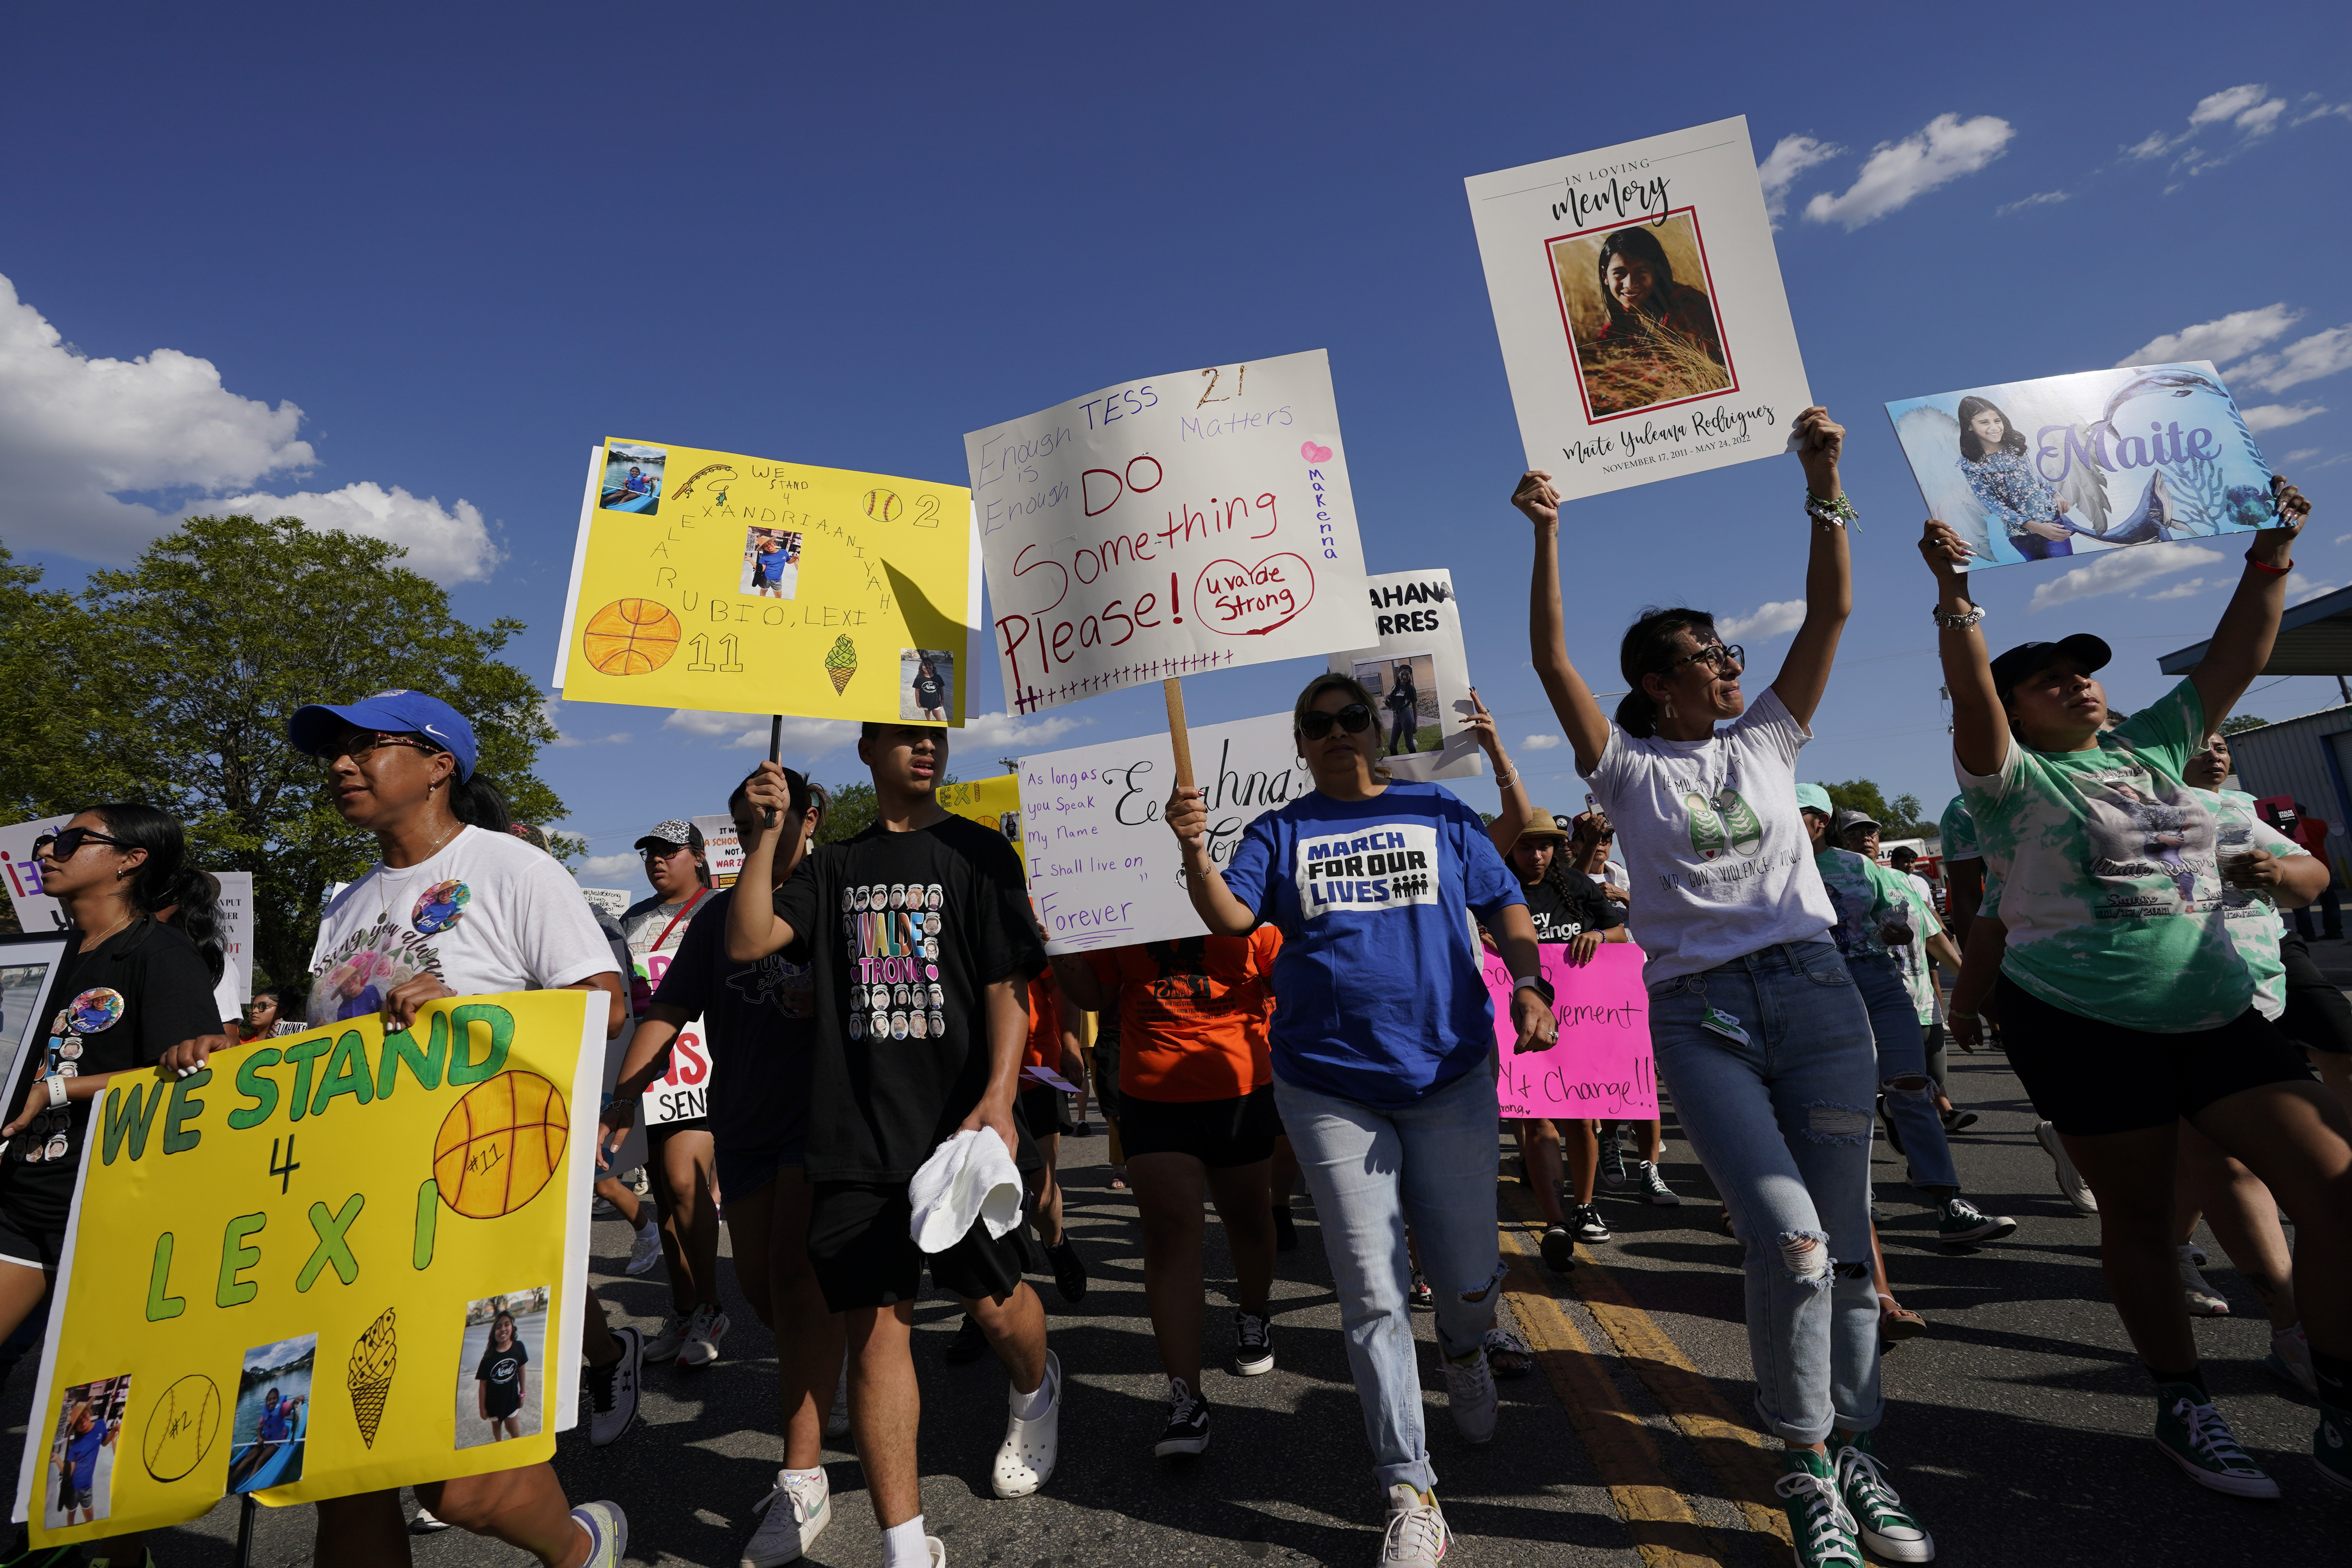 Family and friends of those killed and injured in the school shooting at Robb Elementary take part in a protest march and rally, Sunday, July 10, 2022, in Uvalde, Texas. (AP Photo/Eric Gay)